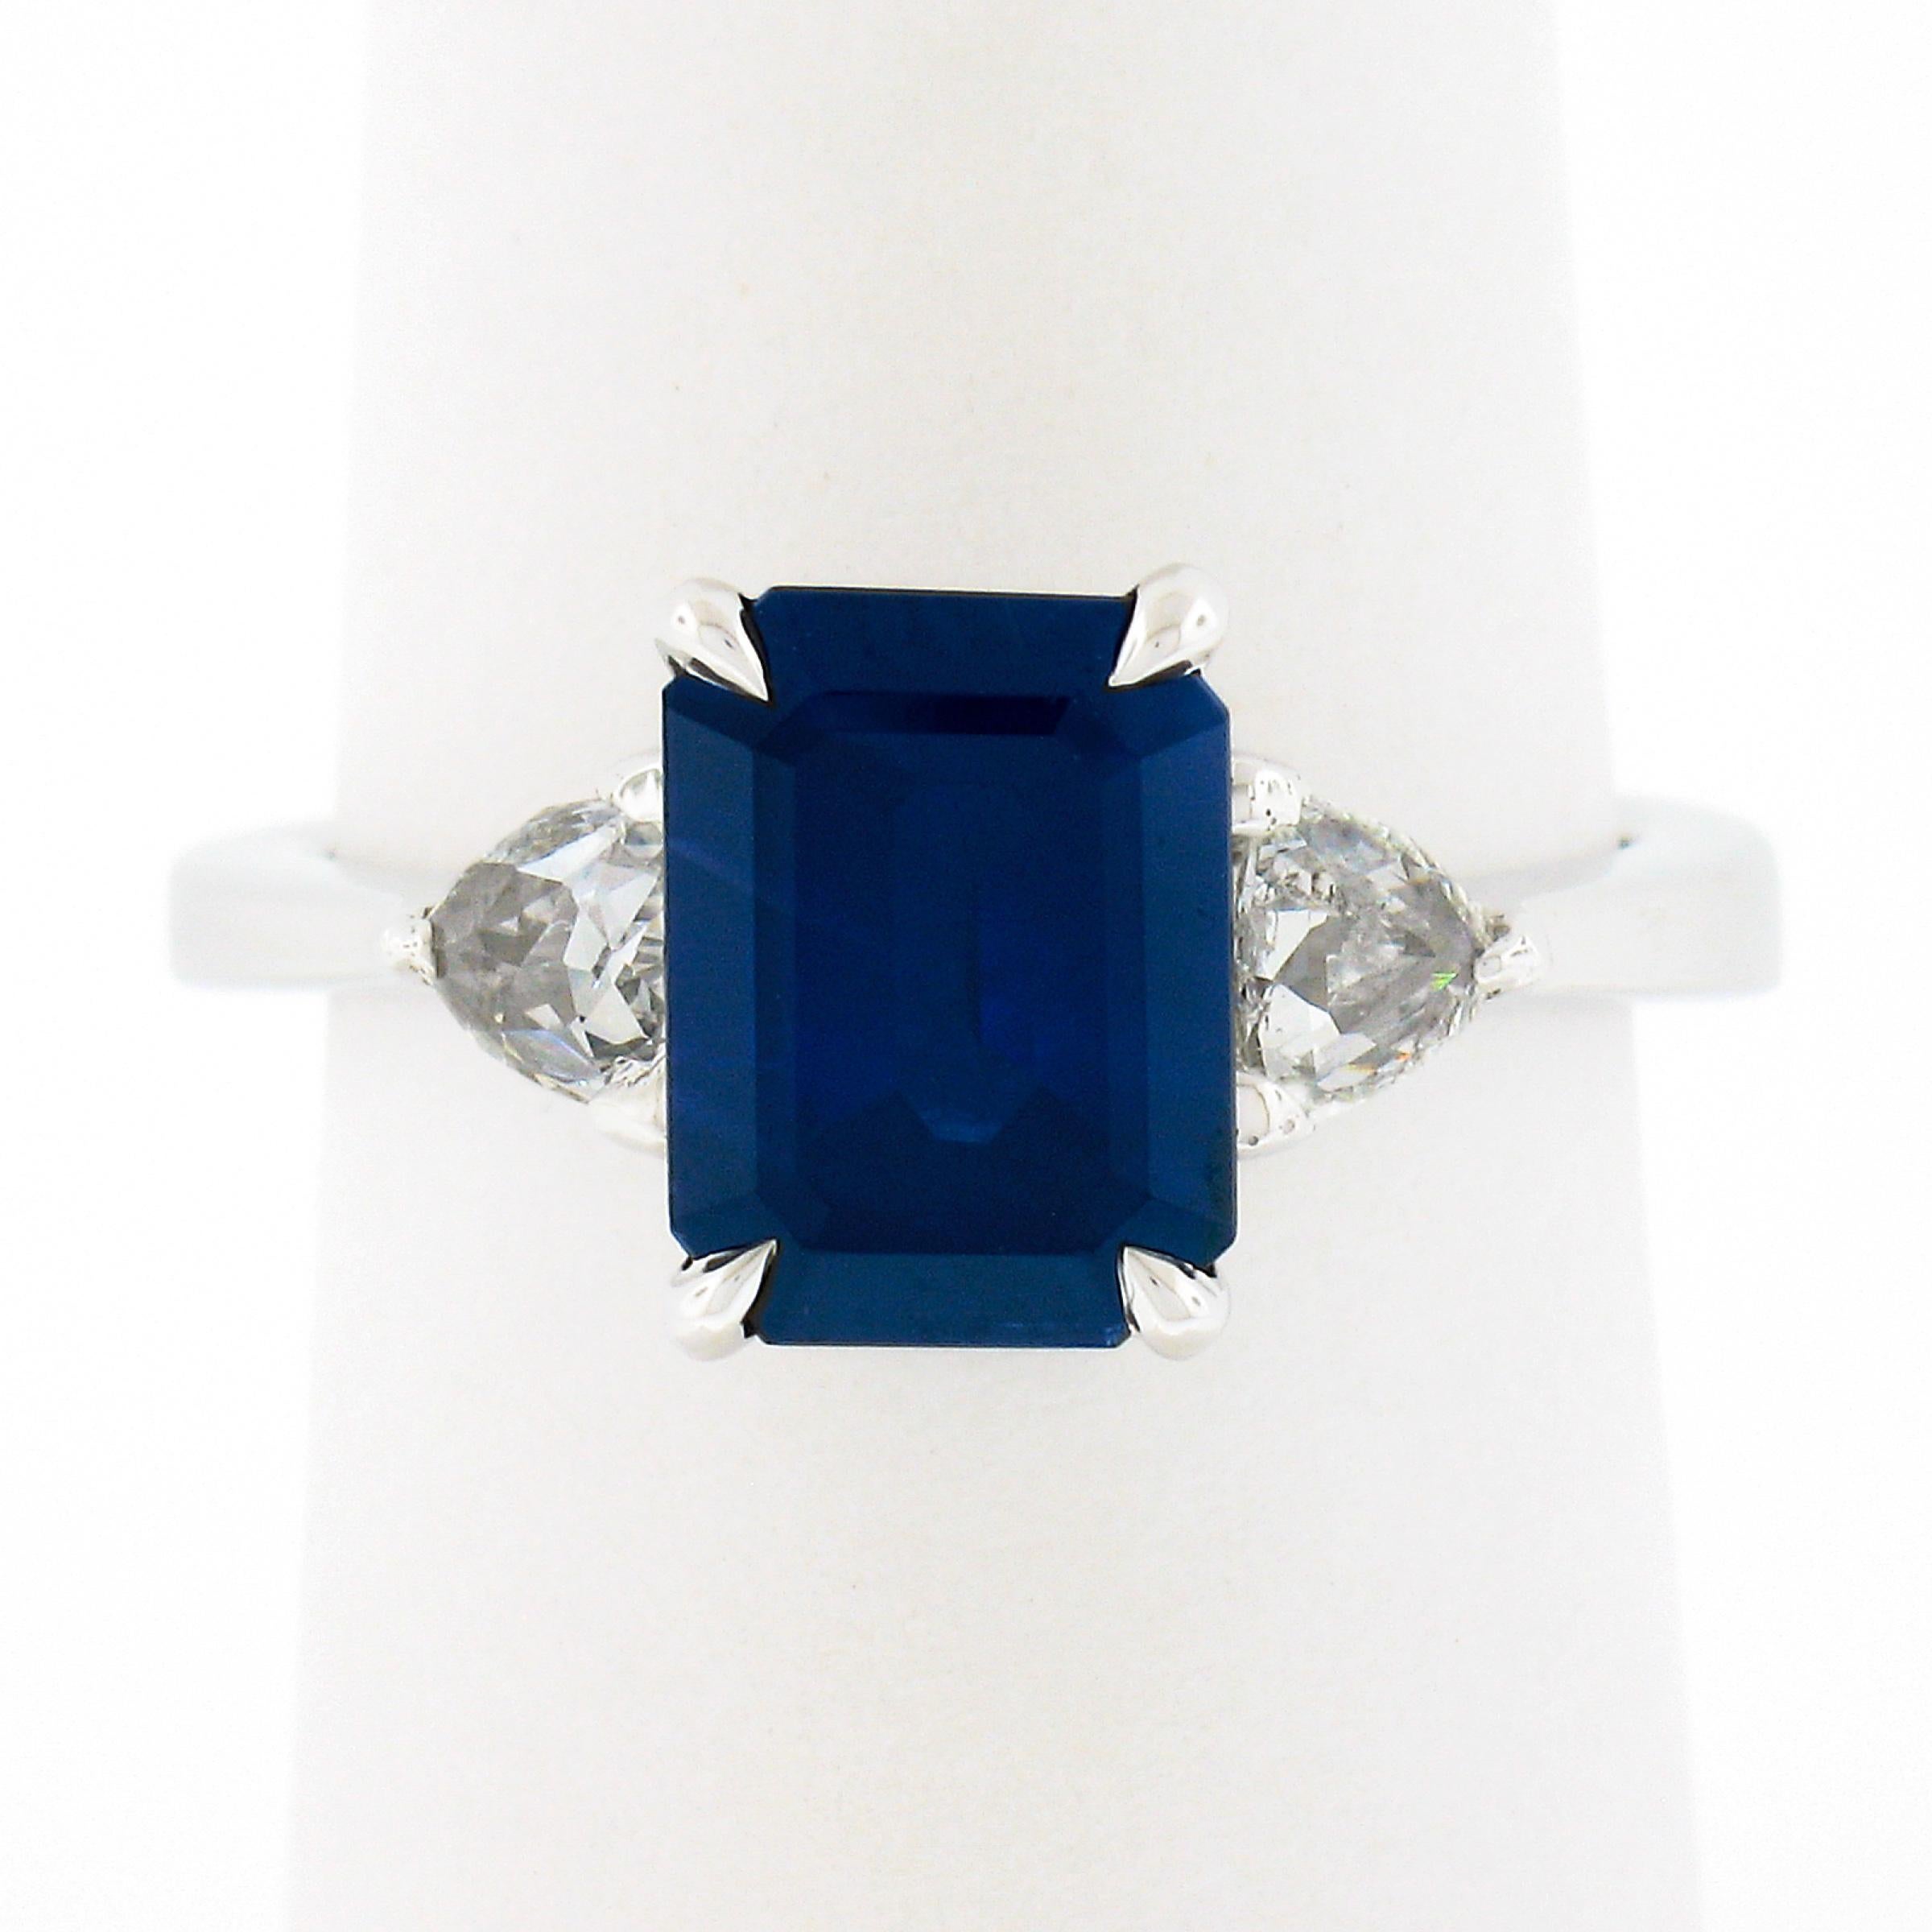 This breathtaking and classically styled sapphire and diamond engagement ring is crafted in solid platinum and features a magnificent, Gubelin certified, emerald cut sapphire solitaire that's perfectly prong set at the center and flanked on either